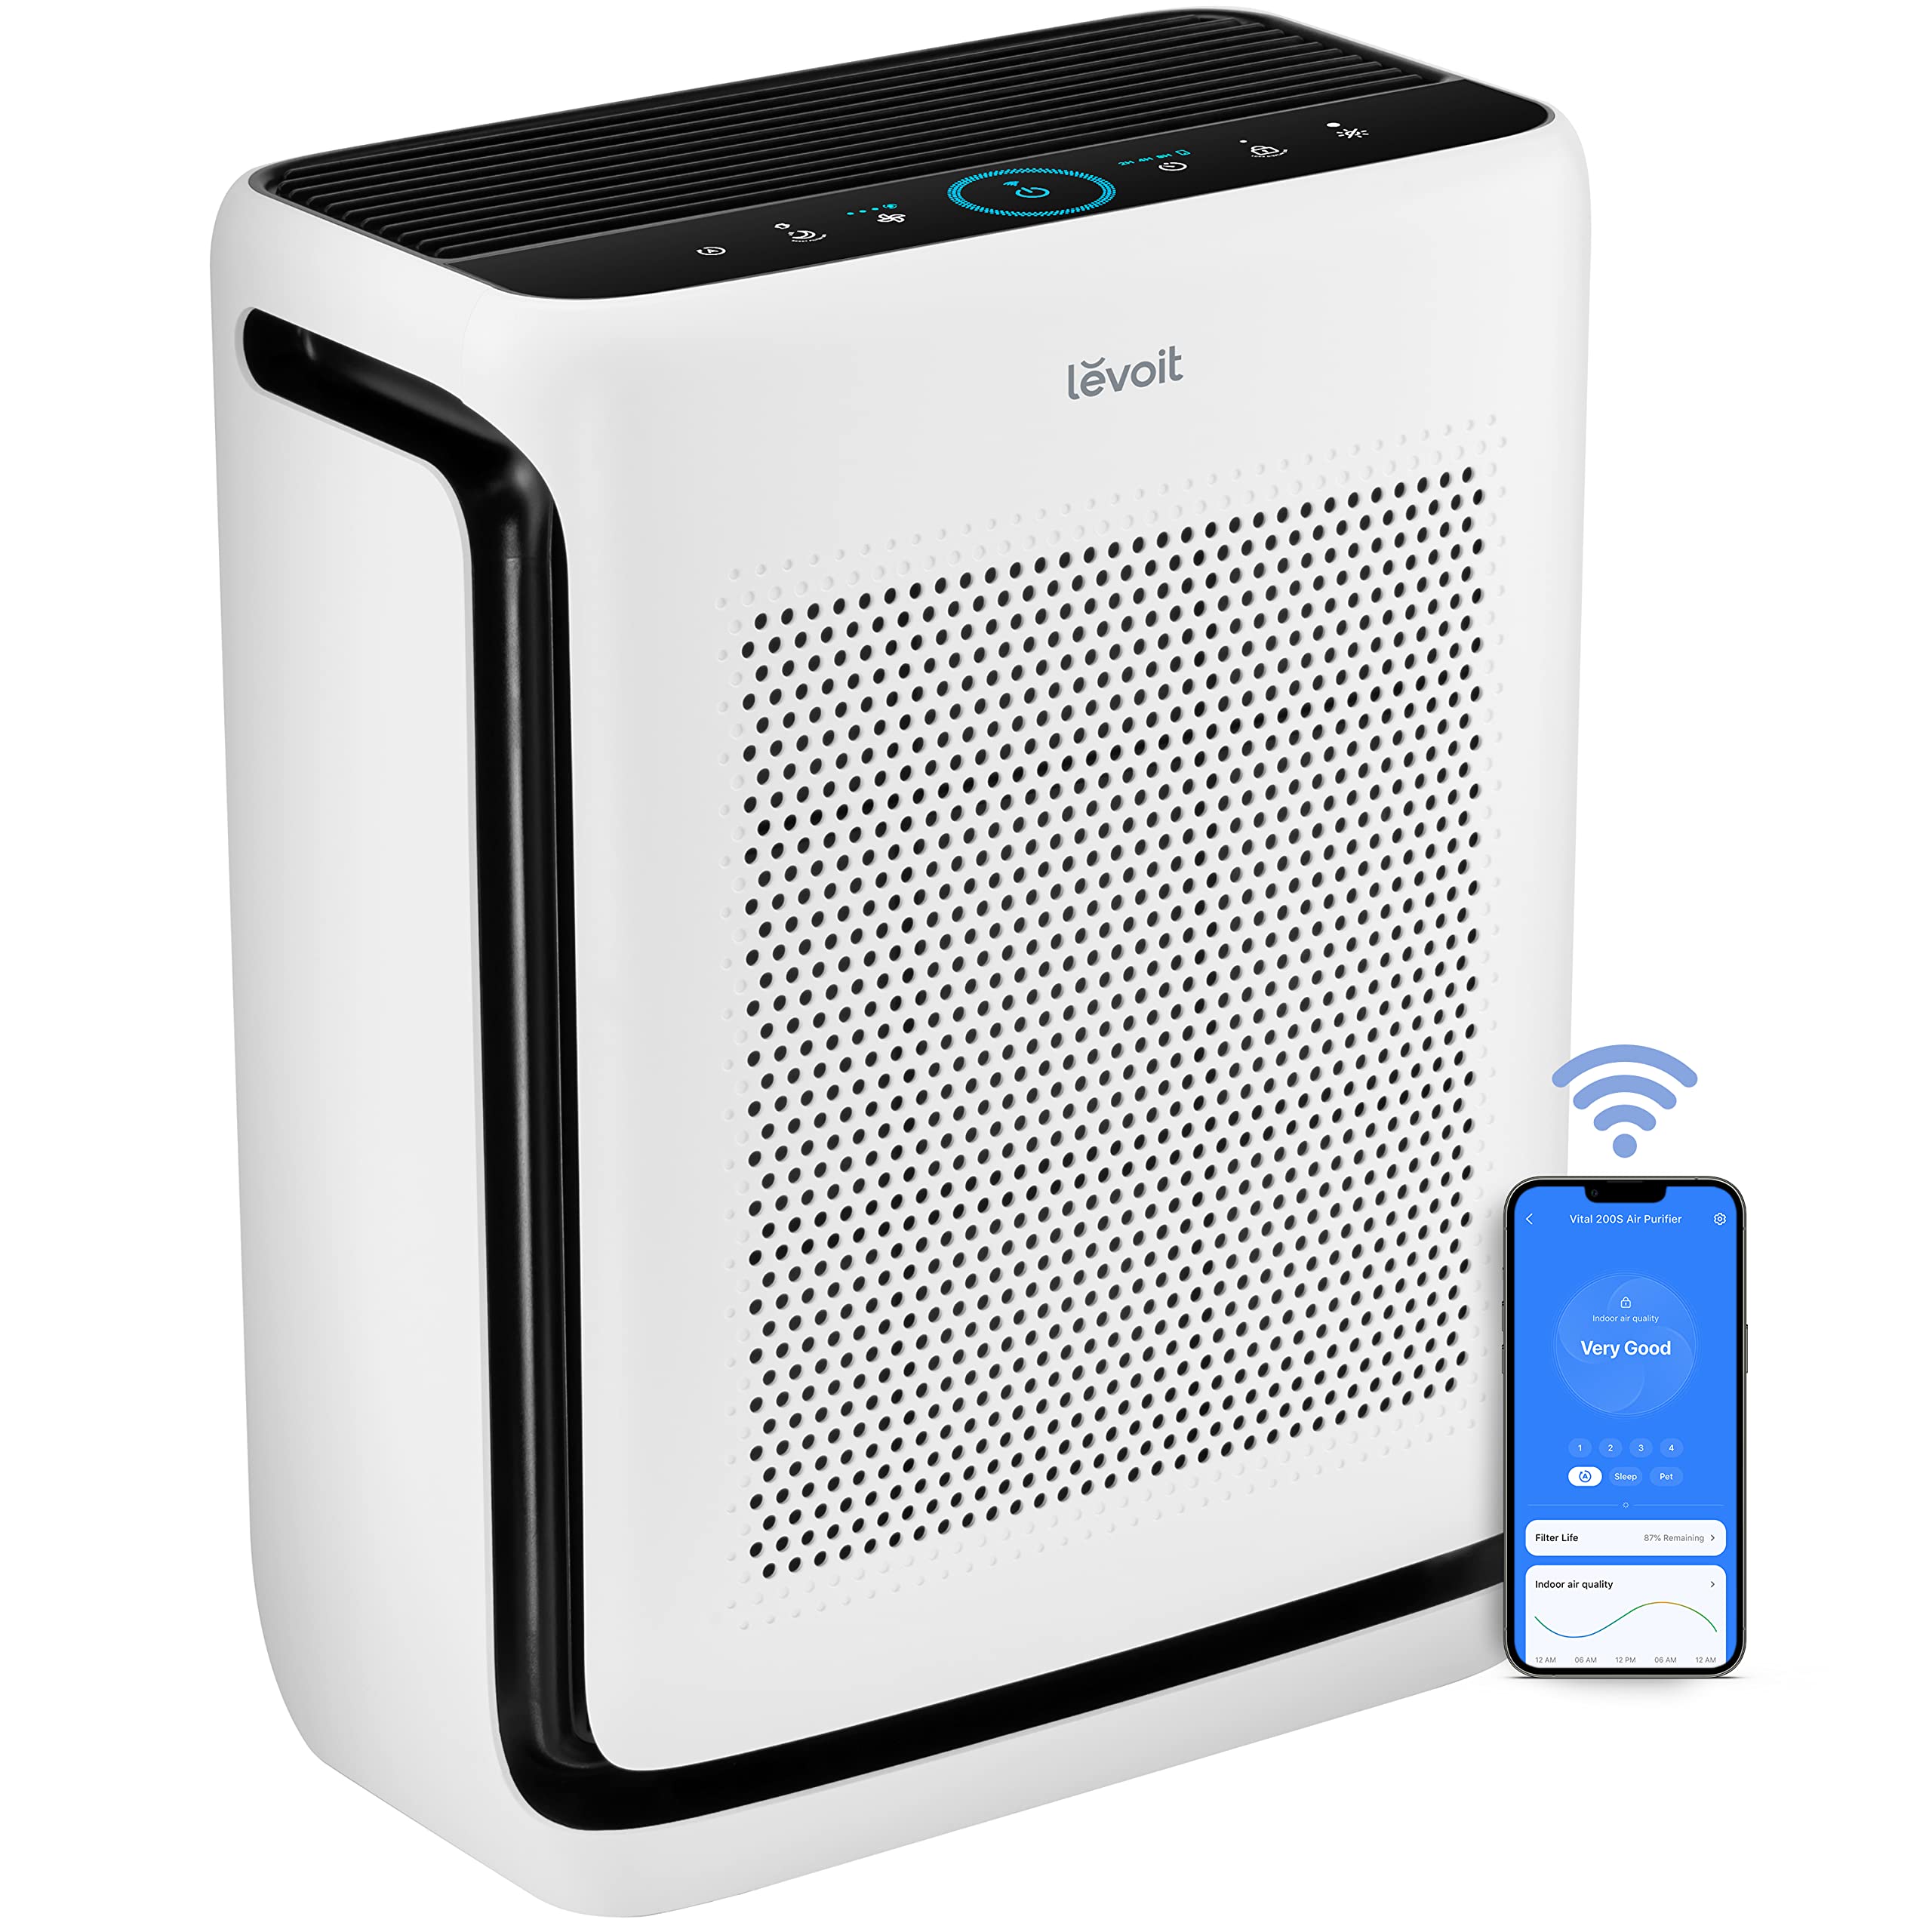 LEVOIT Air Purifiers for Home Large Room Up to 1900 Ft² in 1 Hr with Washable Filters, Air Quality Monitor, Smart WiFi, HEPA Filter Captures Allergies, Pet Hair, Smoke, Pollen in Bedroom, Vital 200S